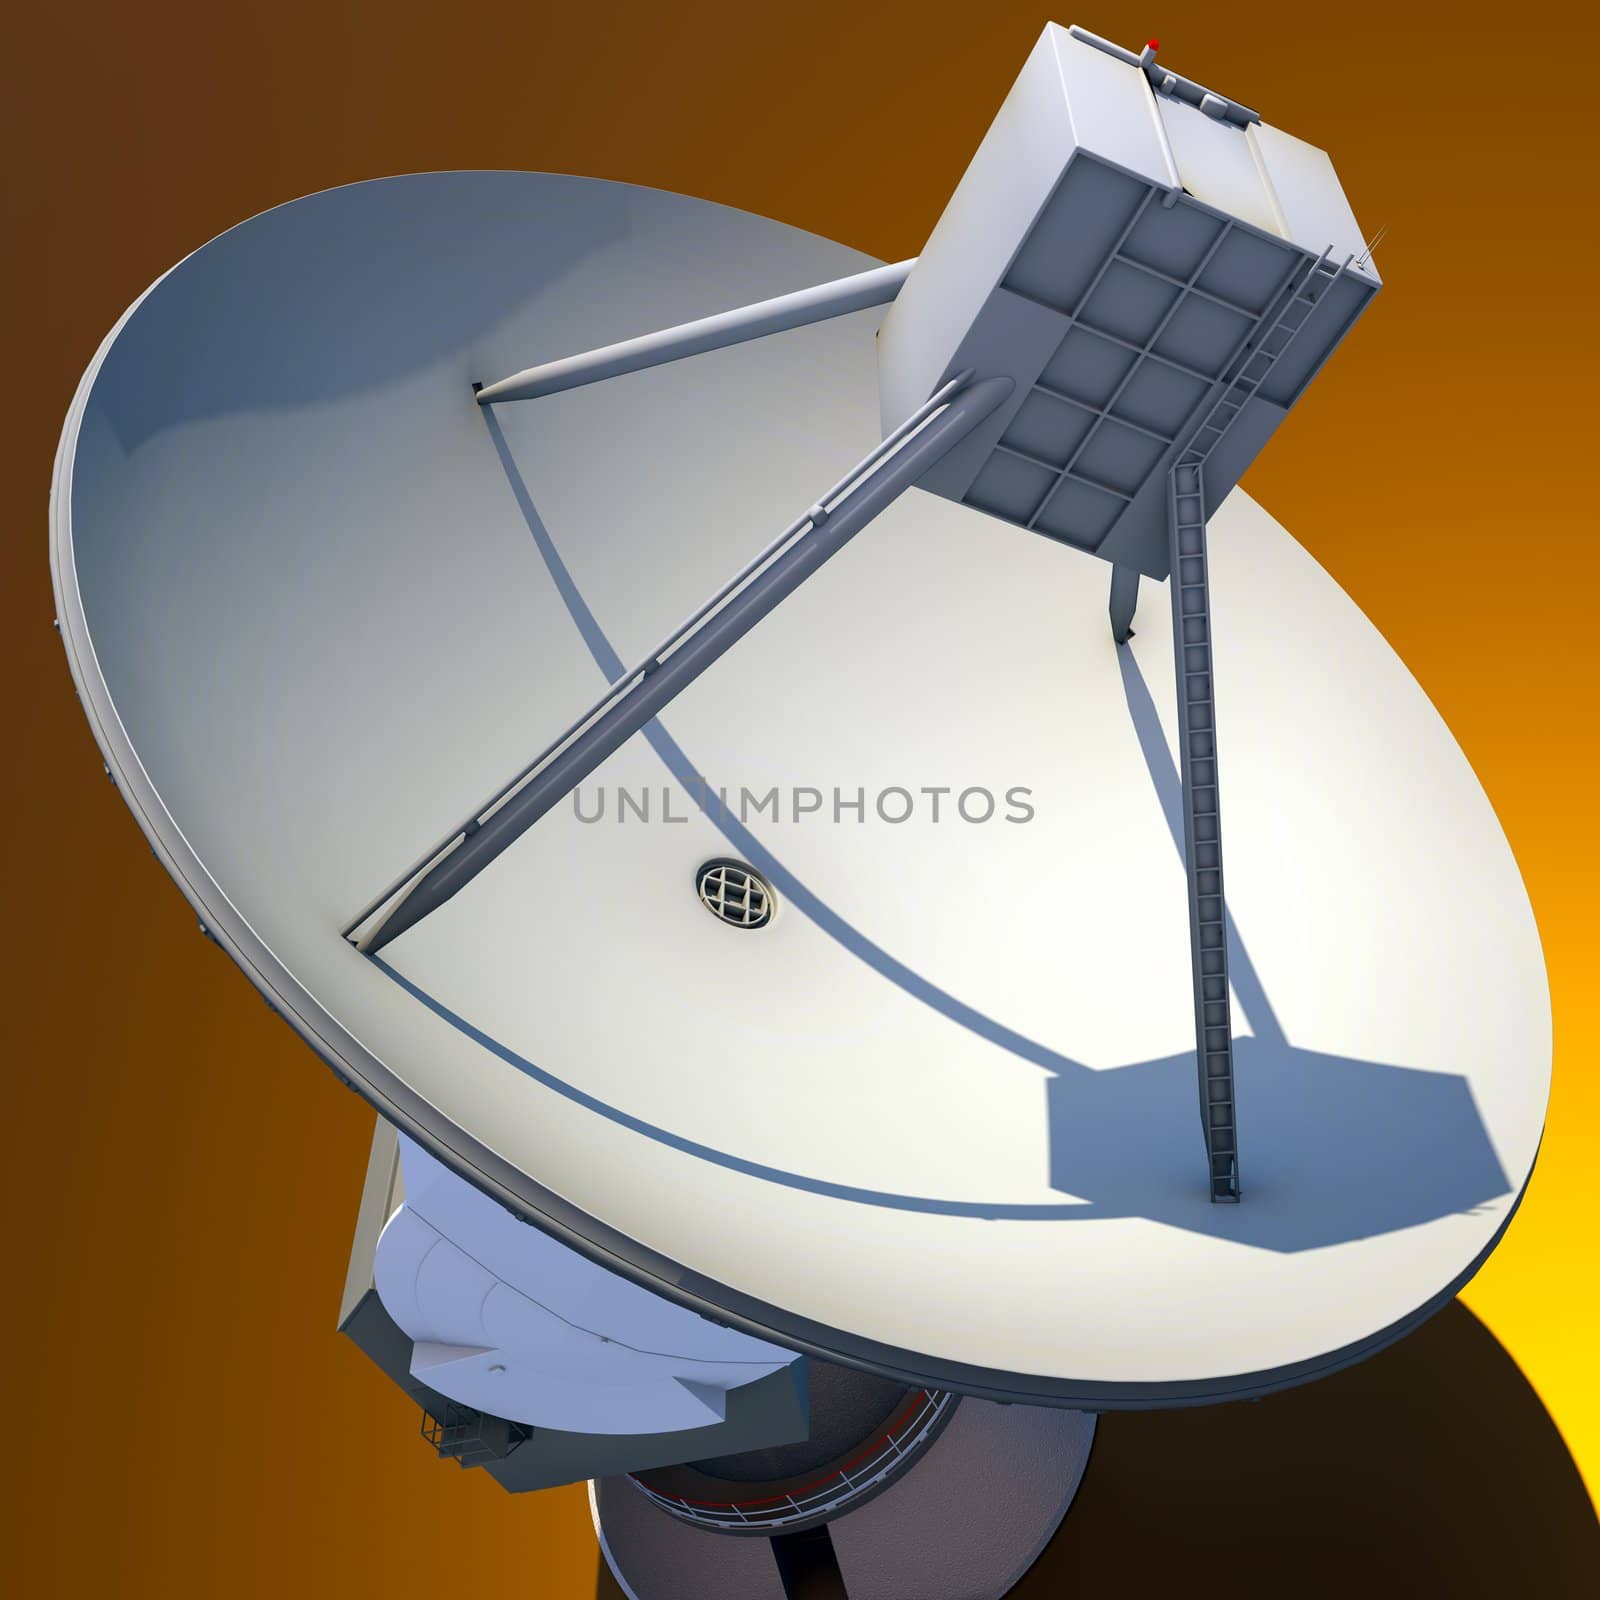 Large Array satellite dish antenna by andromeda13